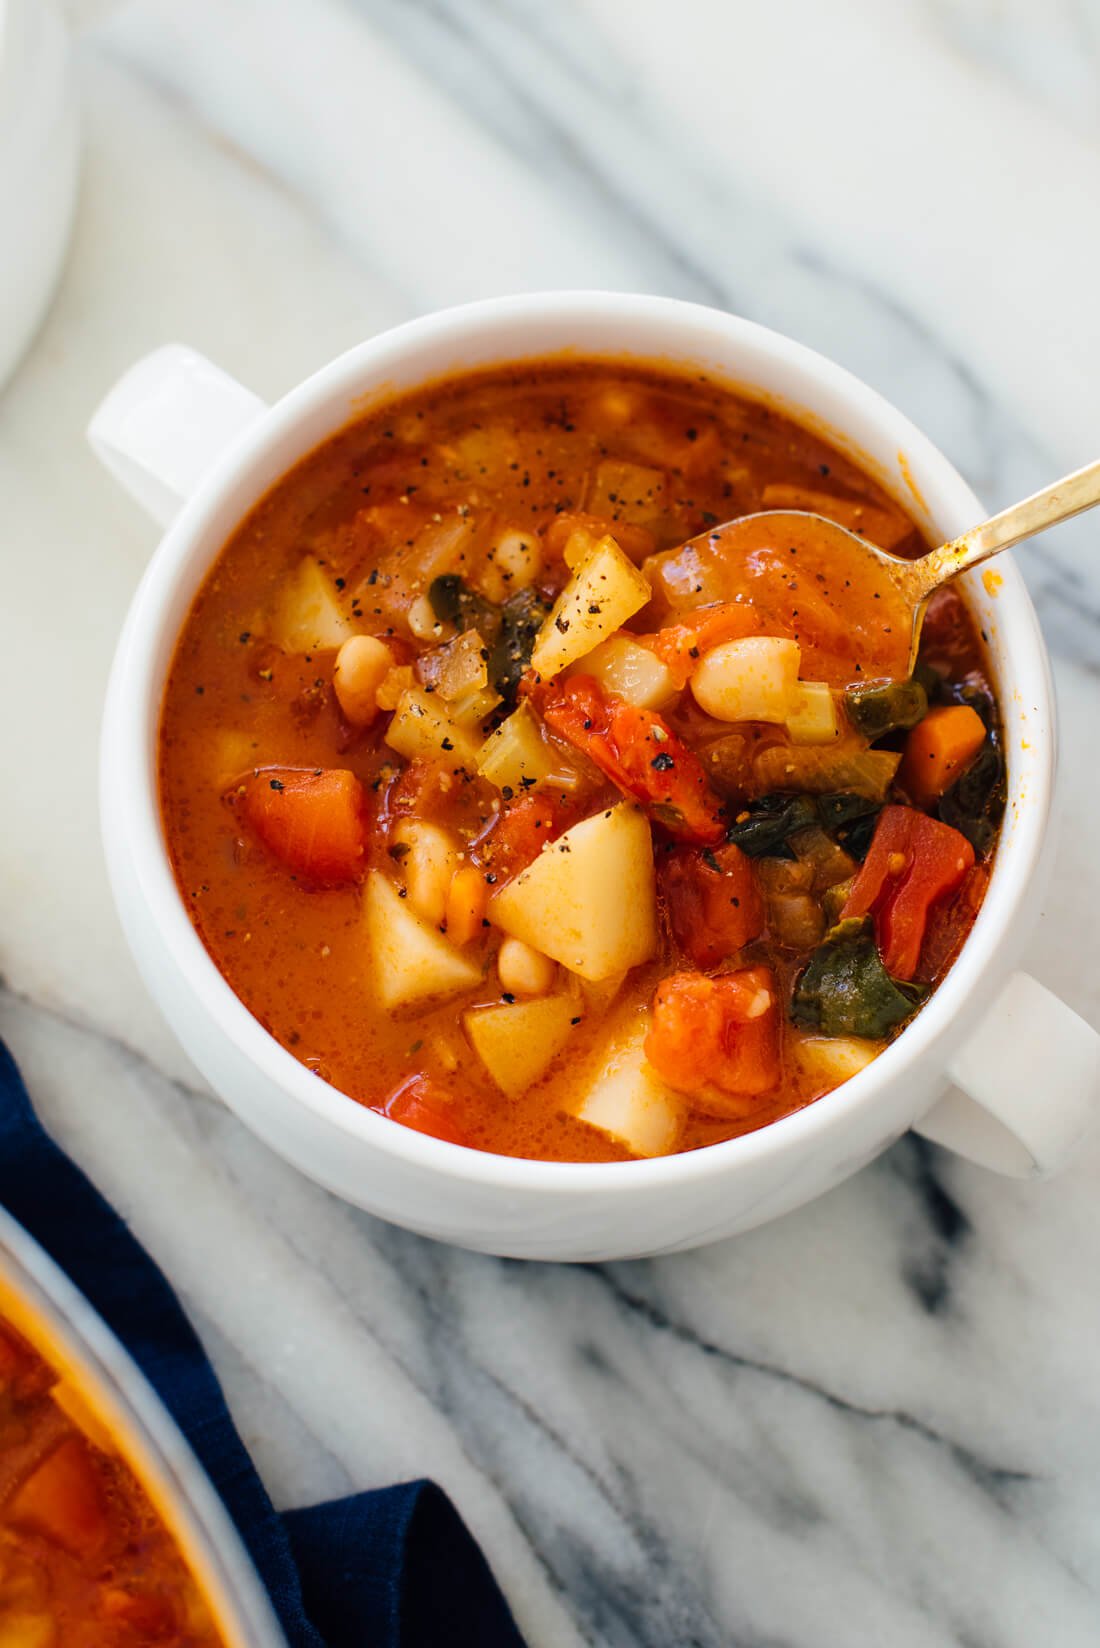 vegan minestrone soup recipe made with vegetable broth and no cheese